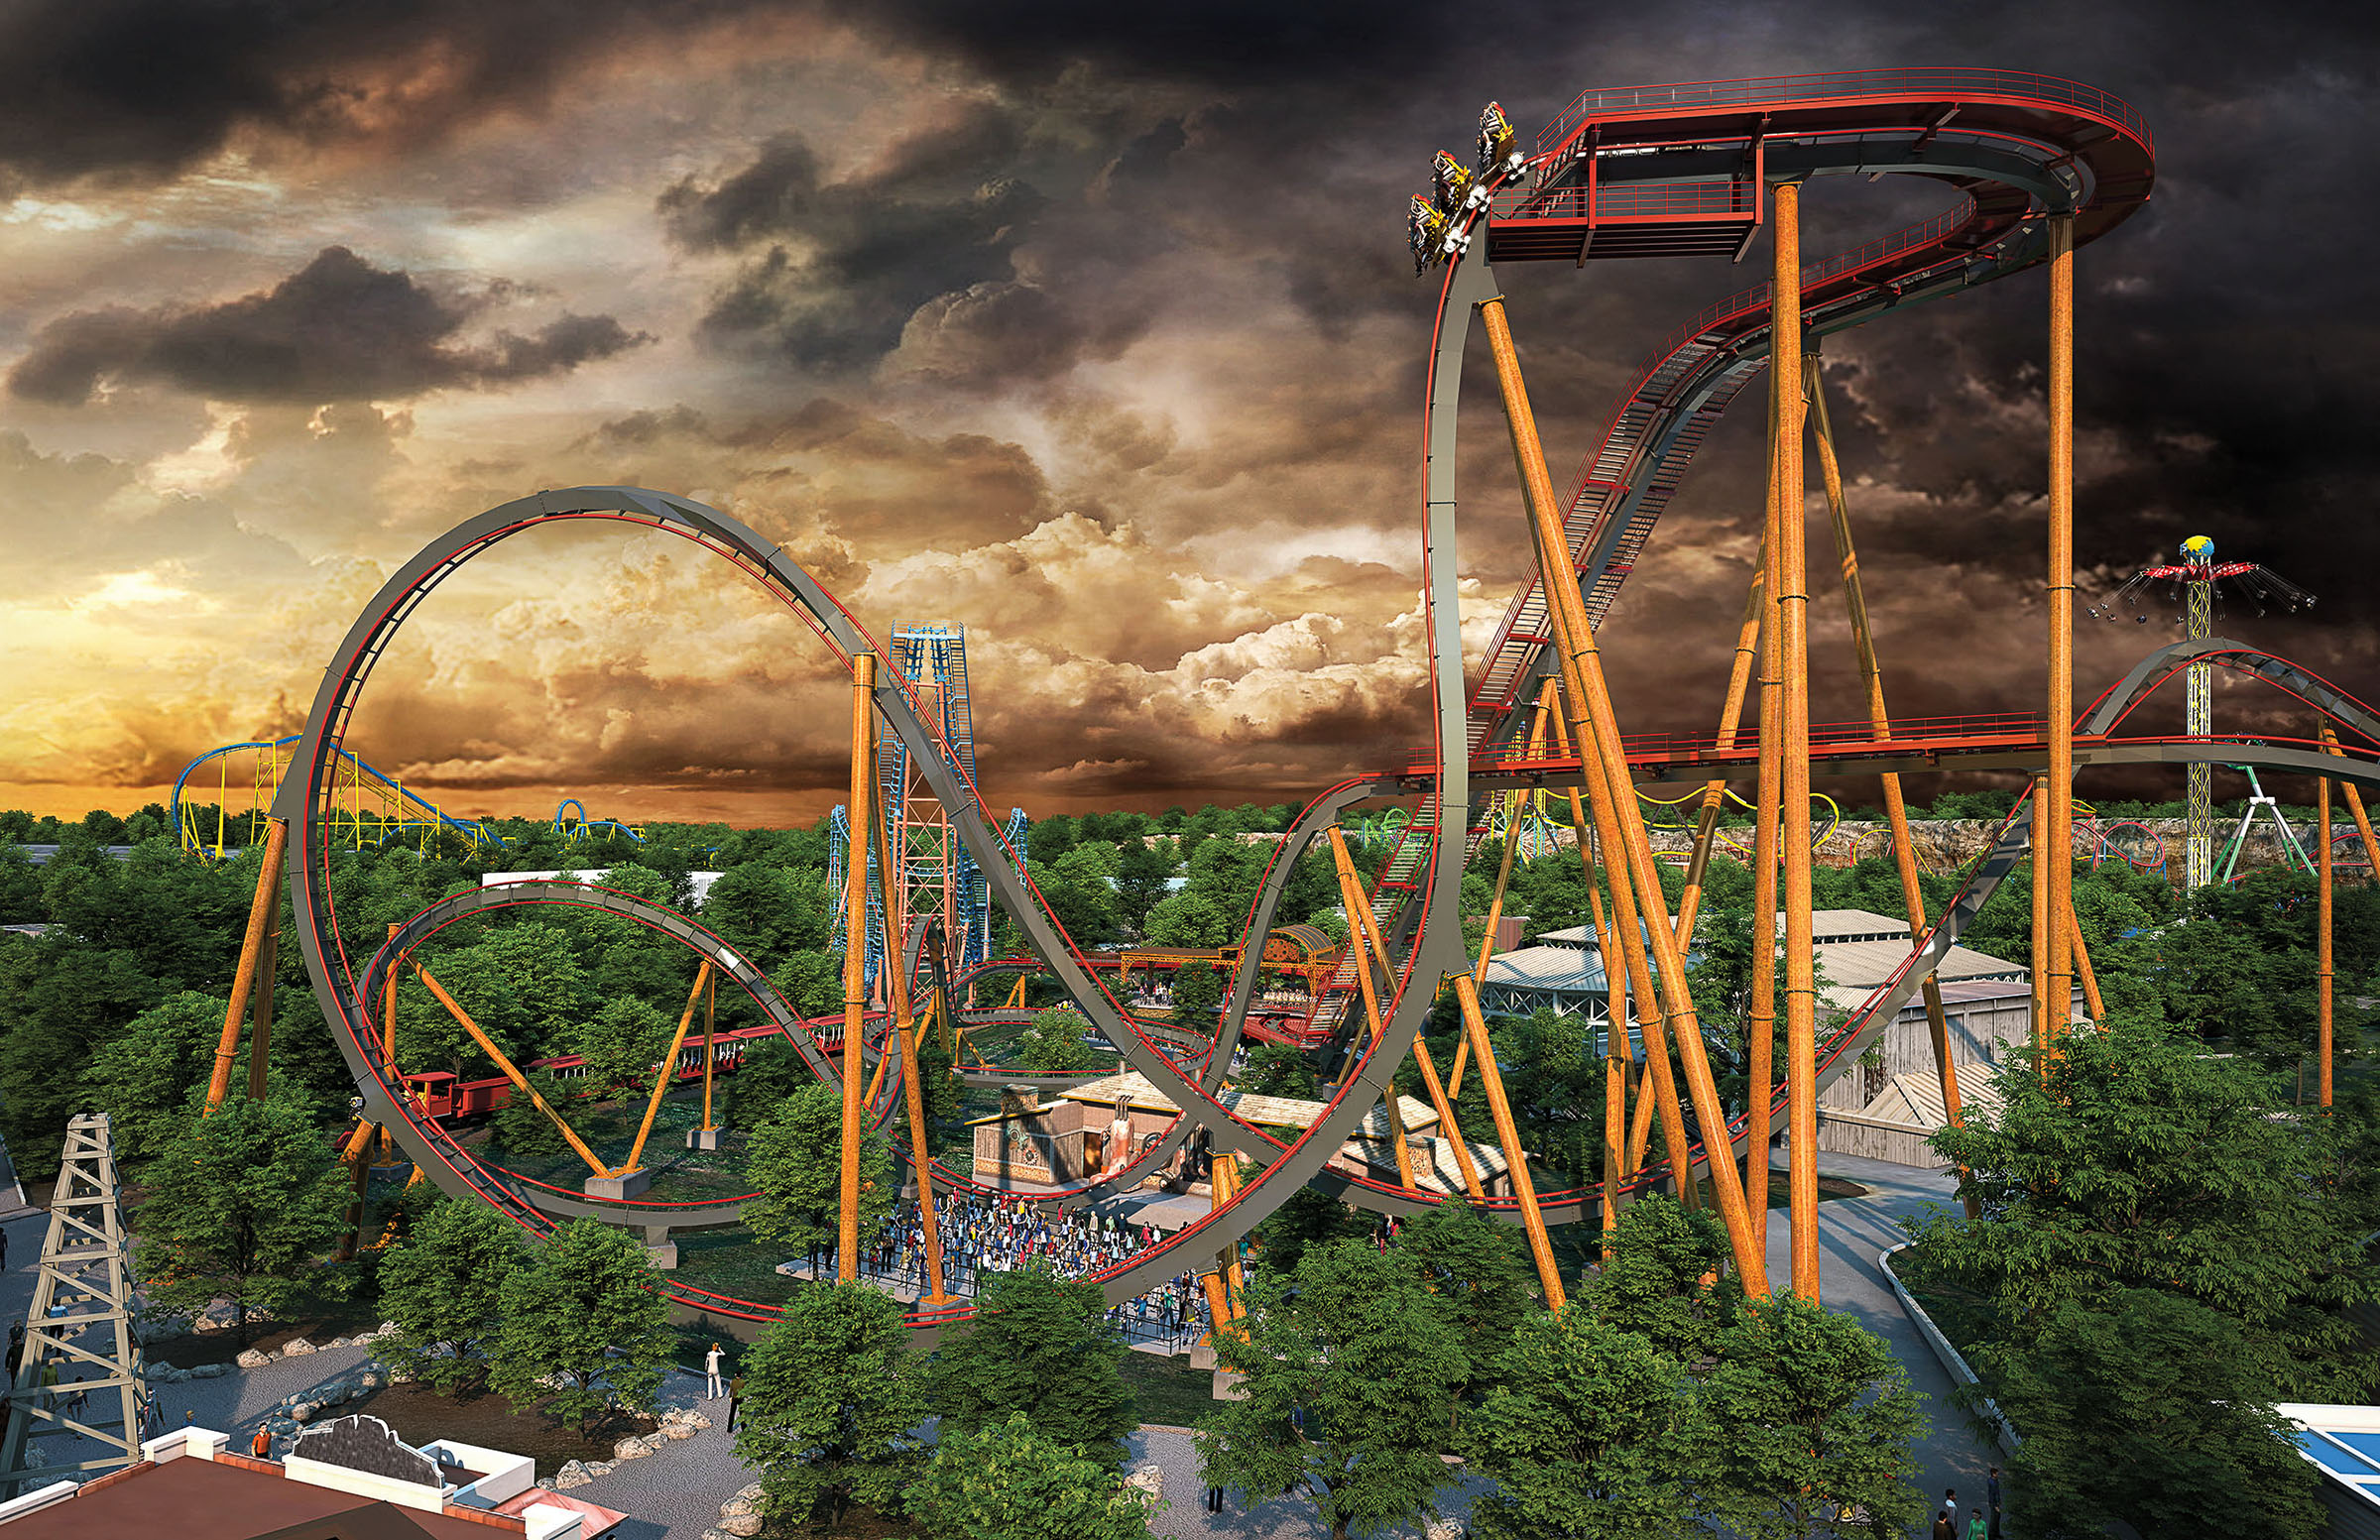 An artistic rendering of a very tall roller coaster with yellow support beams, under a dark and forboeding sky